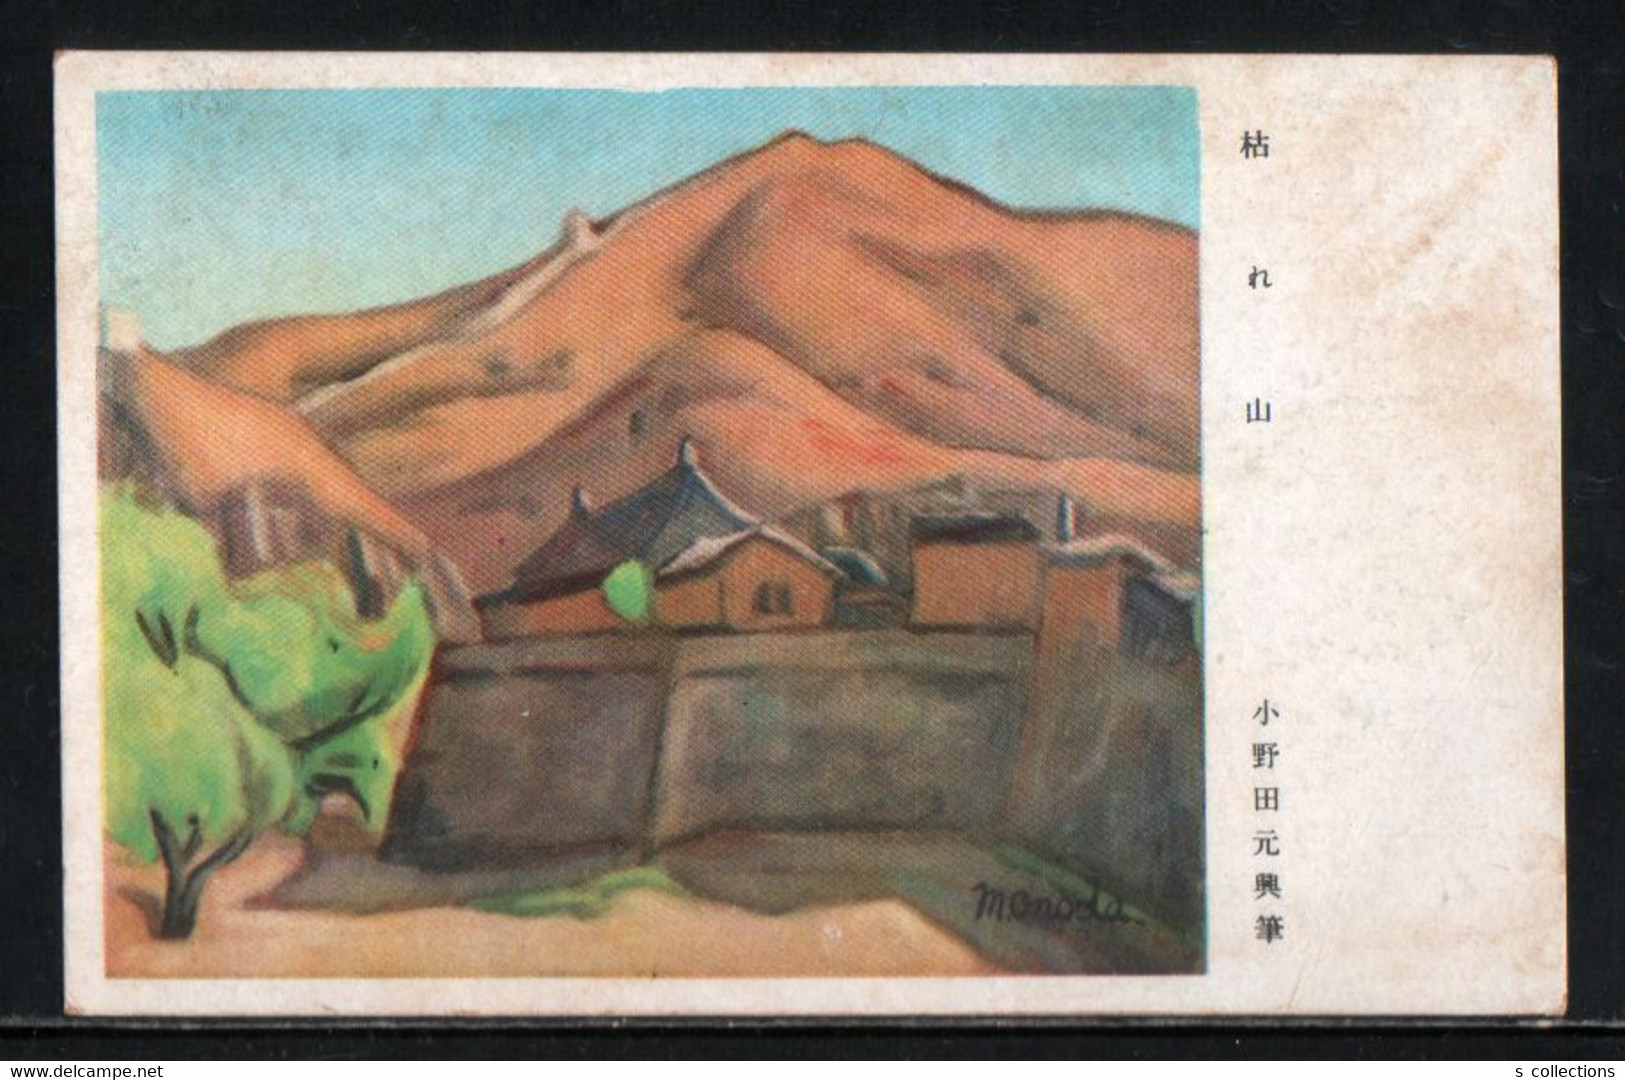 JAPAN WWII Military Picture Postcard North China Mongolia Garrison Army WW2 MANCHURIA CHINE MANDCHOUKOUO JAPON GIAPPONE - 1941-45 Cina Del Nord